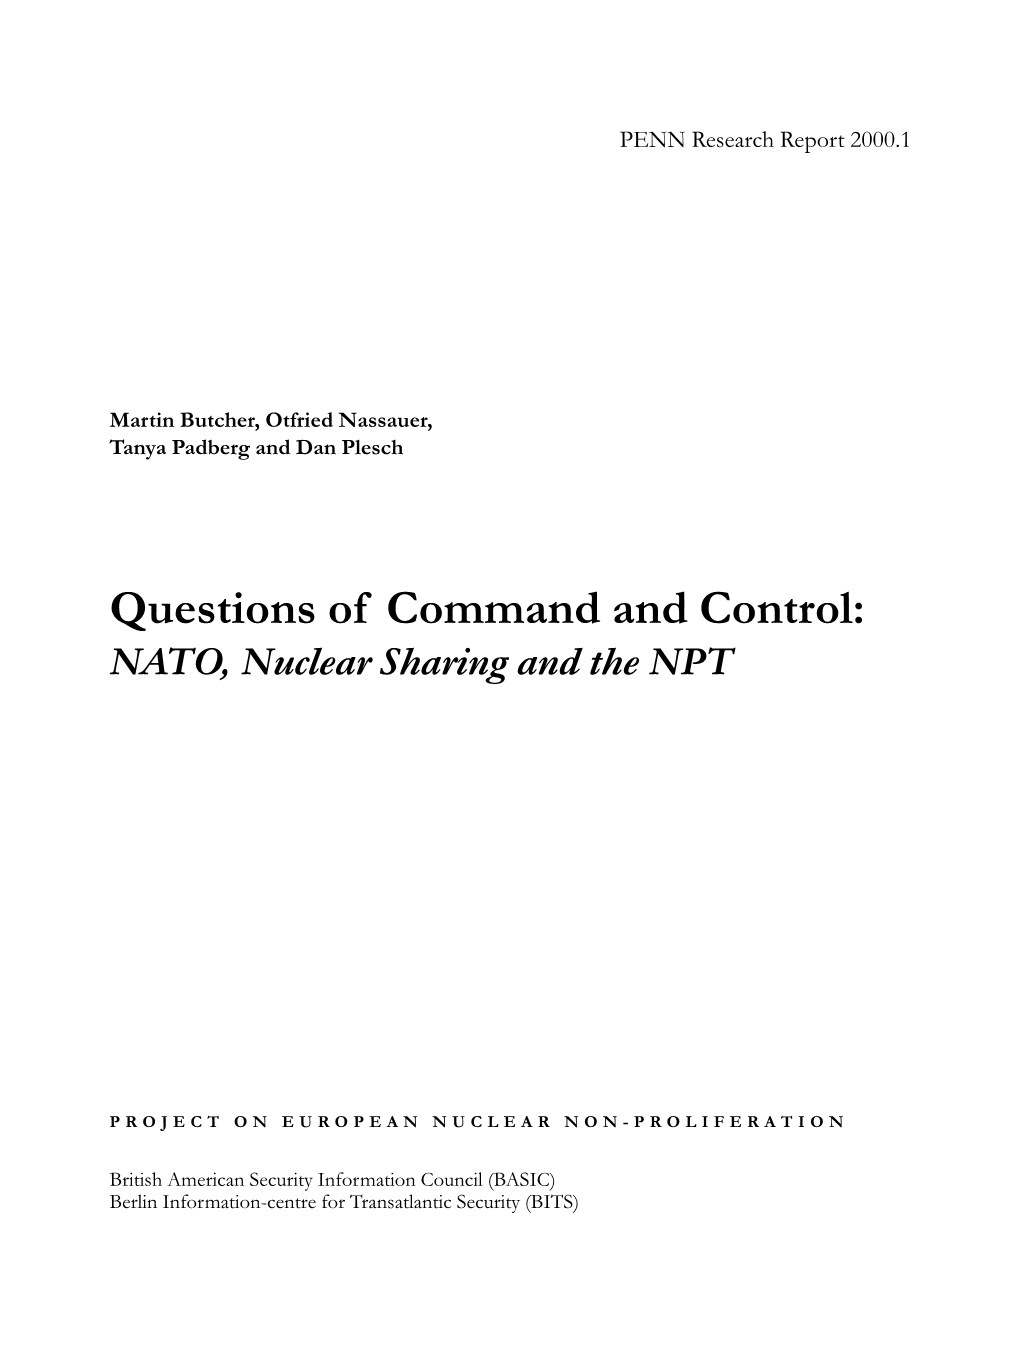 Questions of Command and Control: NATO, Nuclear Sharing and the NPT